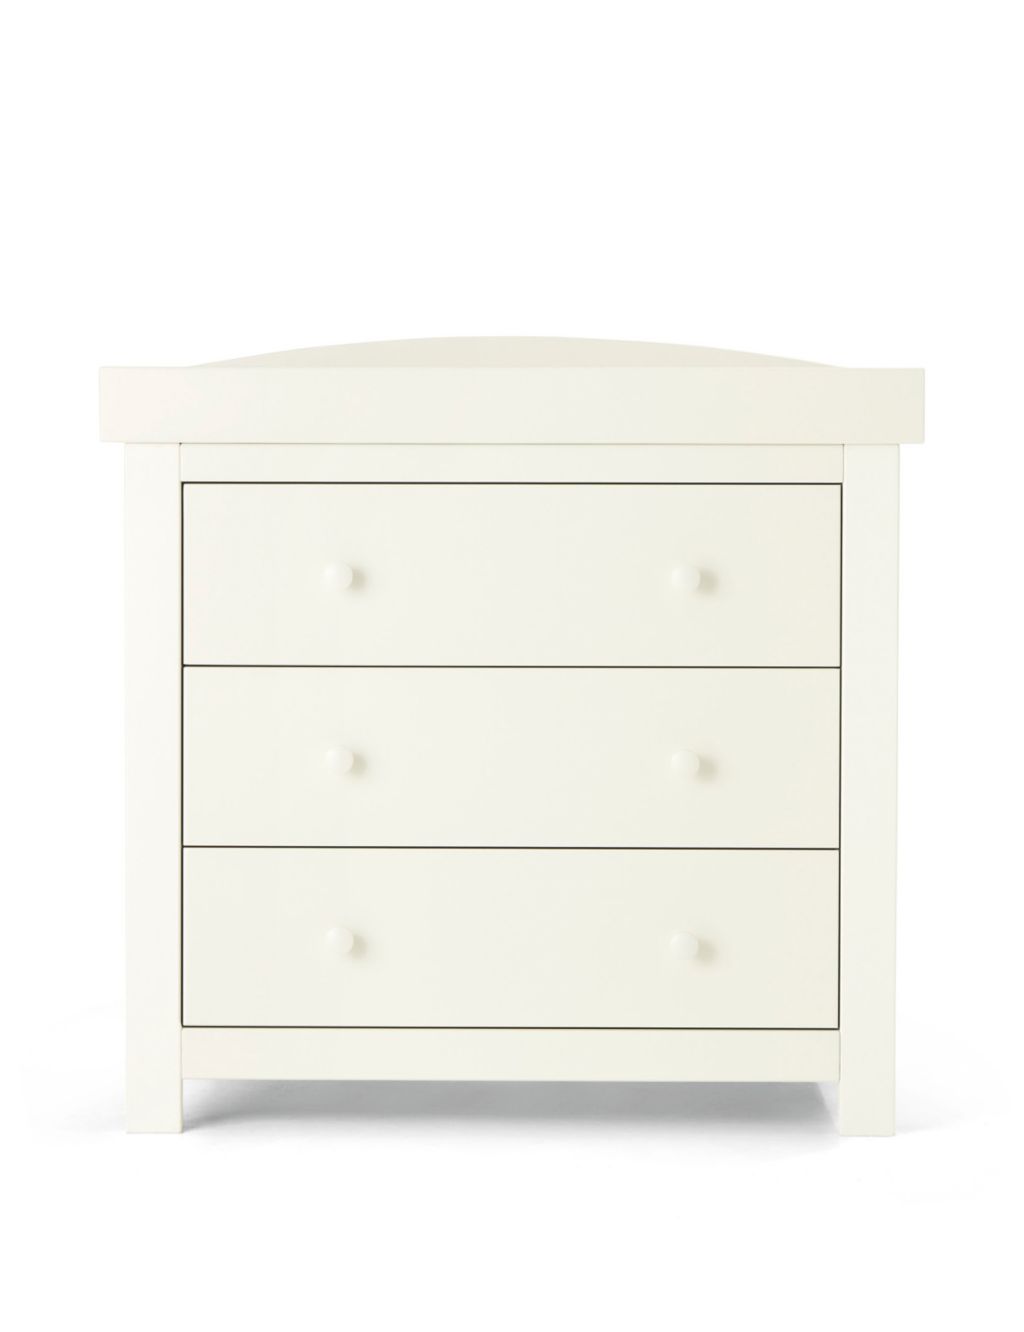 Mia 2 Piece Cotbed Set with Dresser image 5